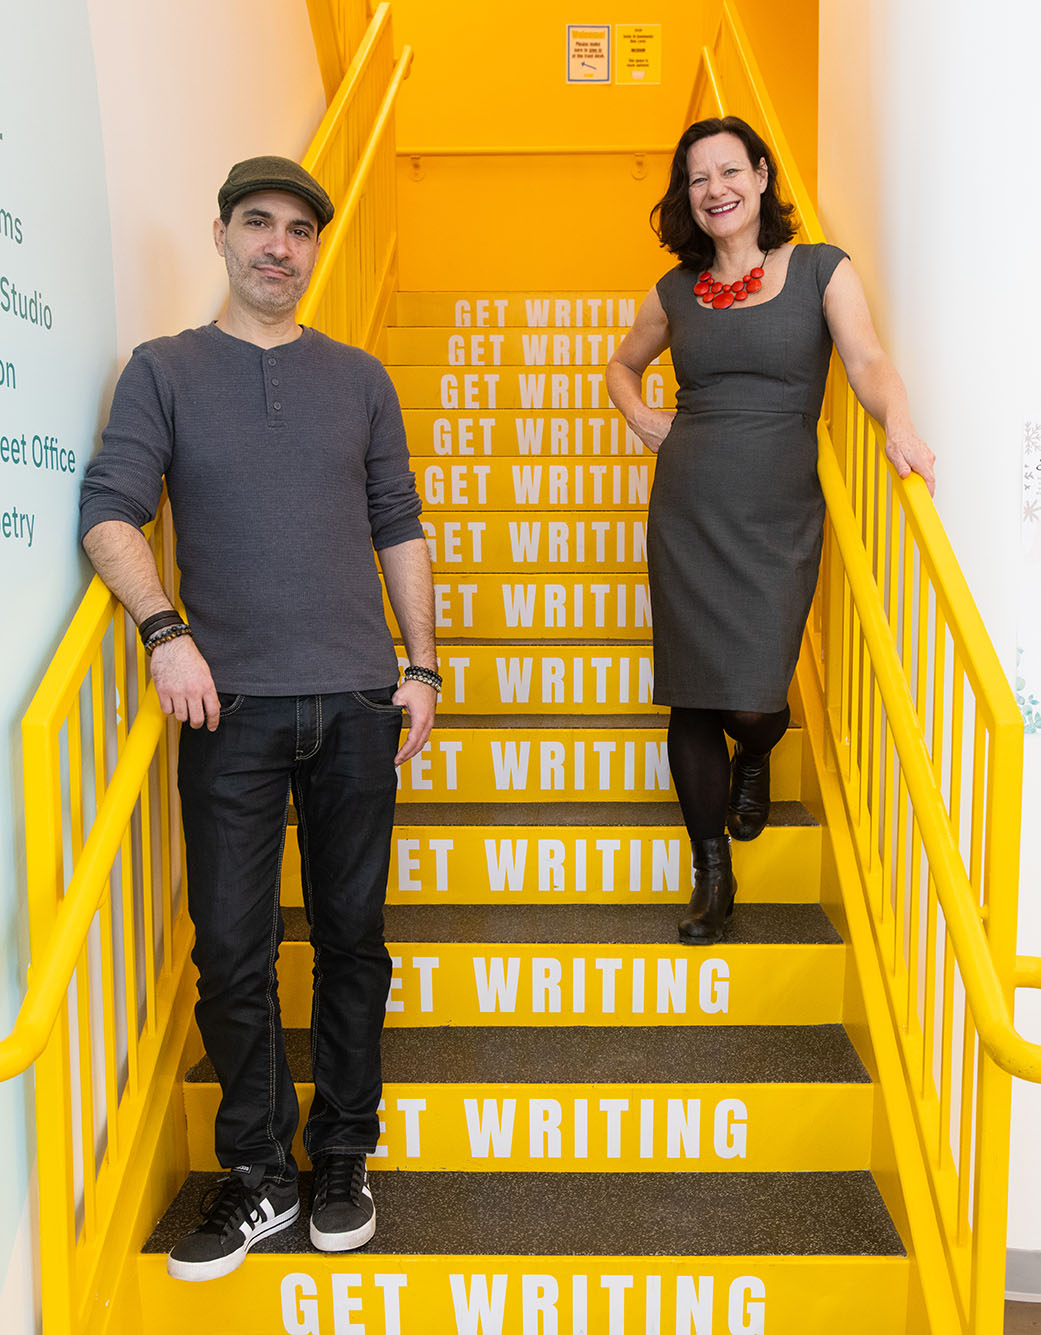 Photo: Artistic director Dariel Suarez (GRS’12) (left) and founder and executive director Eve Bridburg (GRS’97) stand and pose on a set of bright yellow stairs. Each step has the words "Get writing" printed on them in white. A latino man wearing a grey beret, grey shirt, and black pants stands with one arm resting on the railing to his left and smiles. To his right, a white woman wearing a grey dress, black pantyhose, and red chunky necklace smiles and stands with one arm resting and poised on the railing to her right.